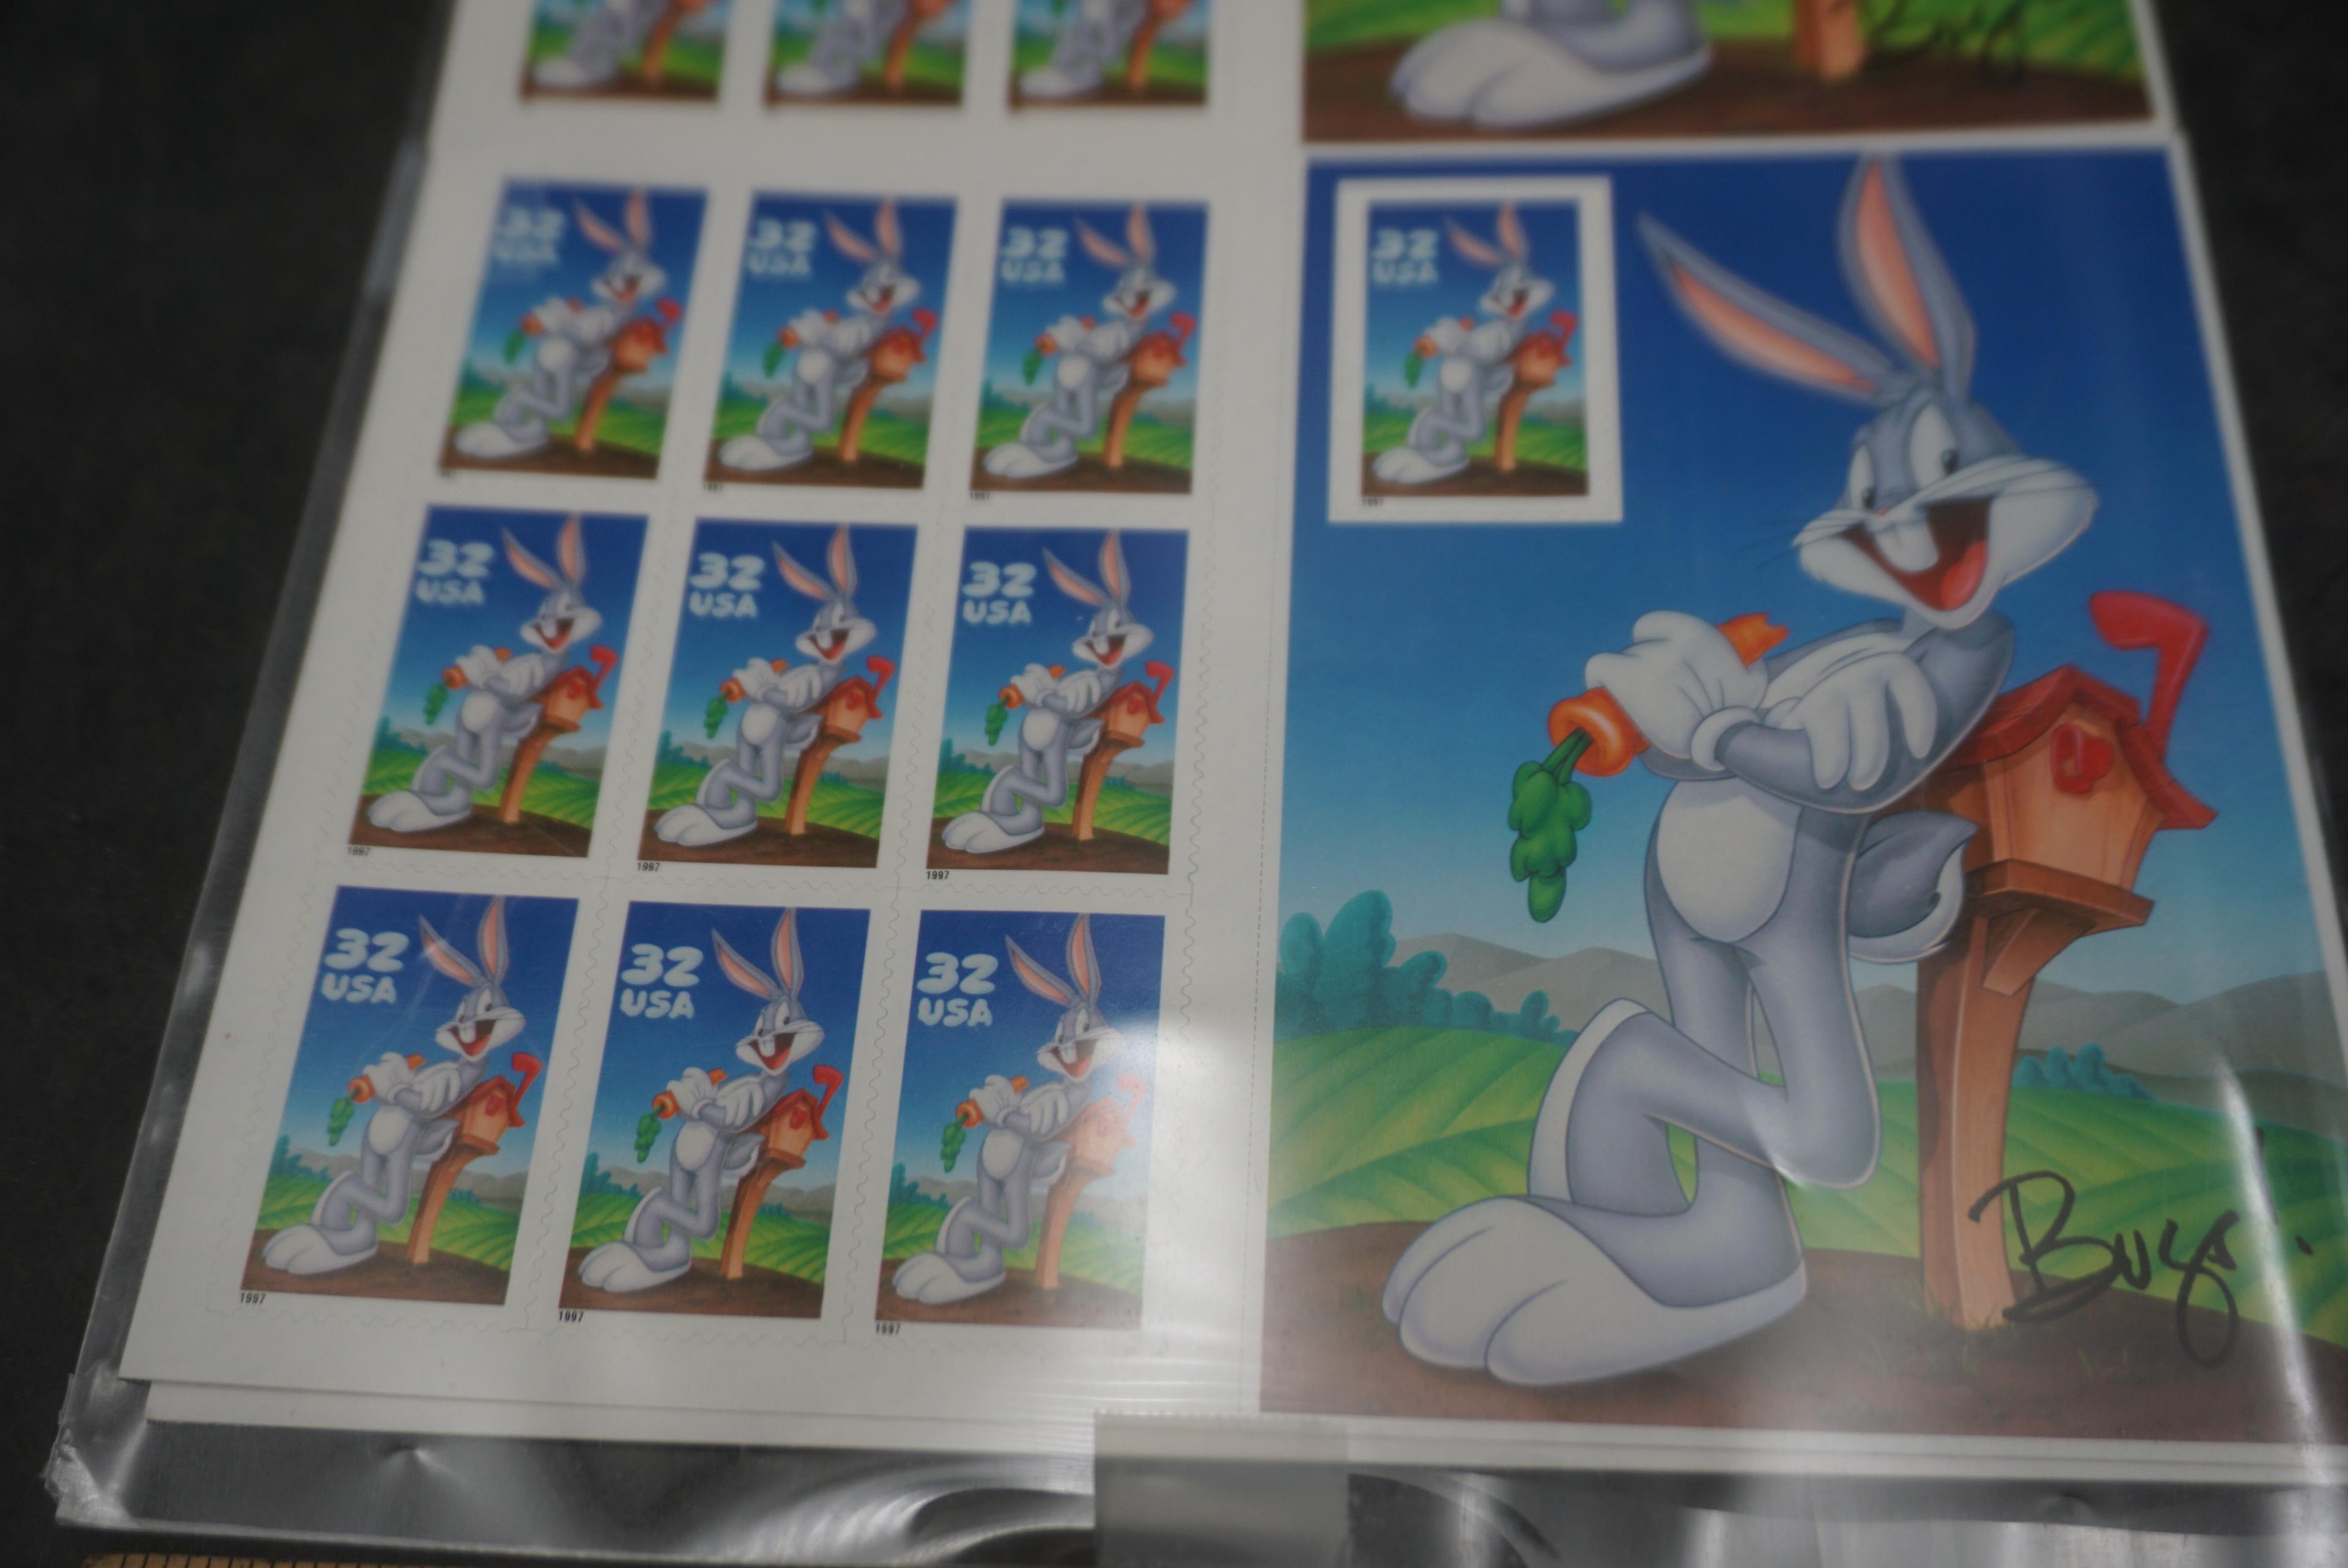 2 - Sheets Of Bugs Bunny U.S. Postage Stamps From 1997